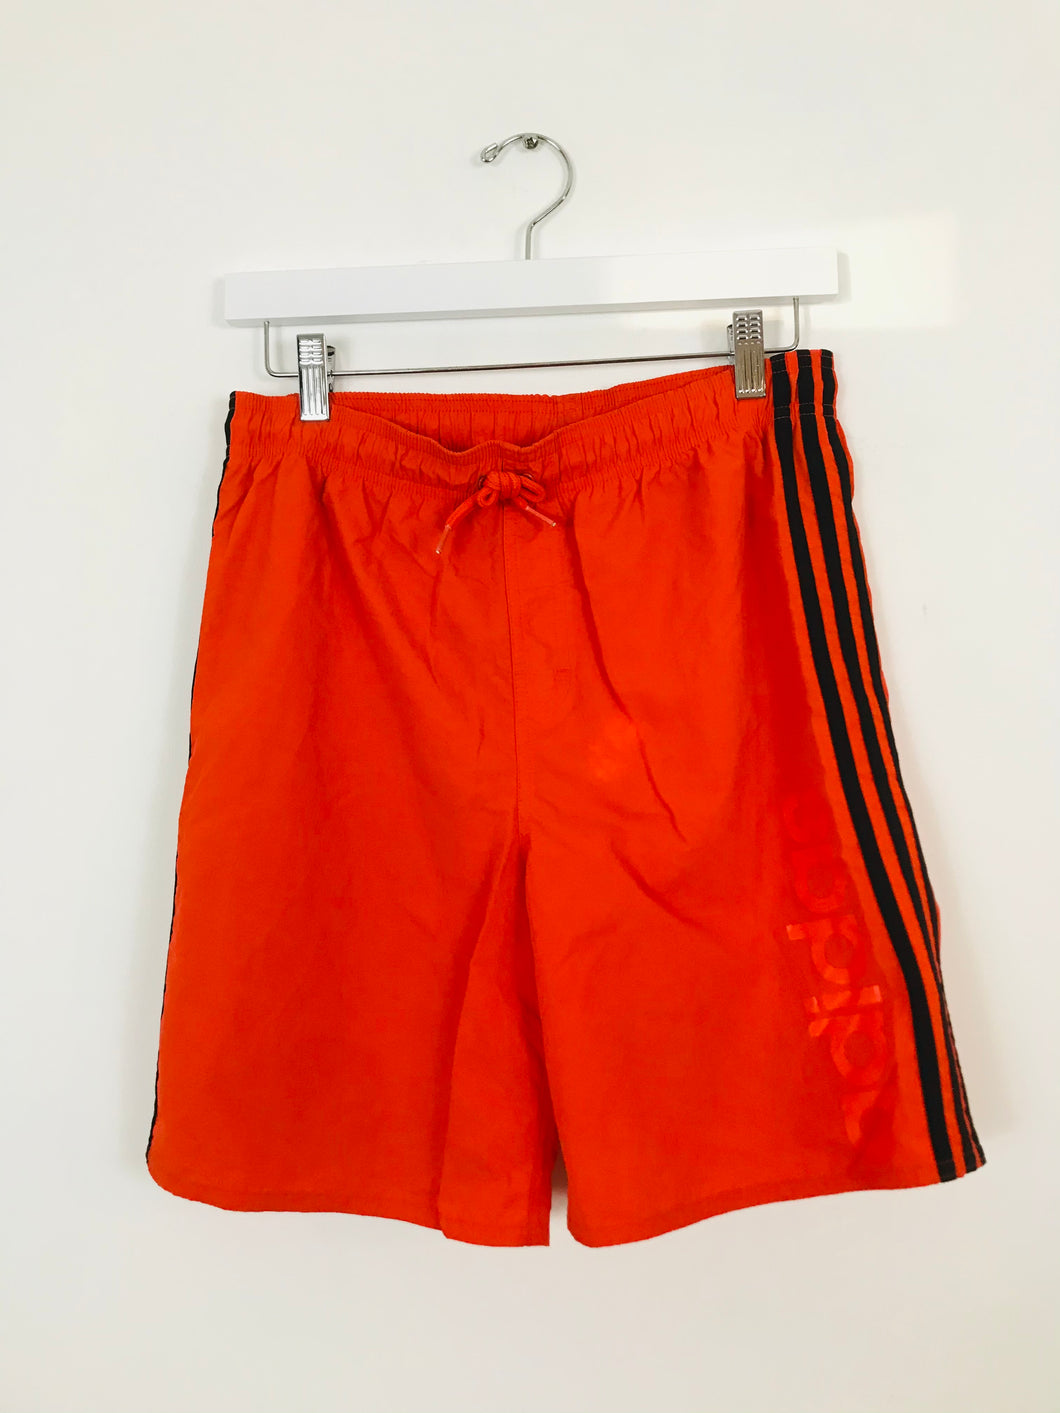 Adidas Kids Vintage Sports Shorts | Age 13-14 | Red